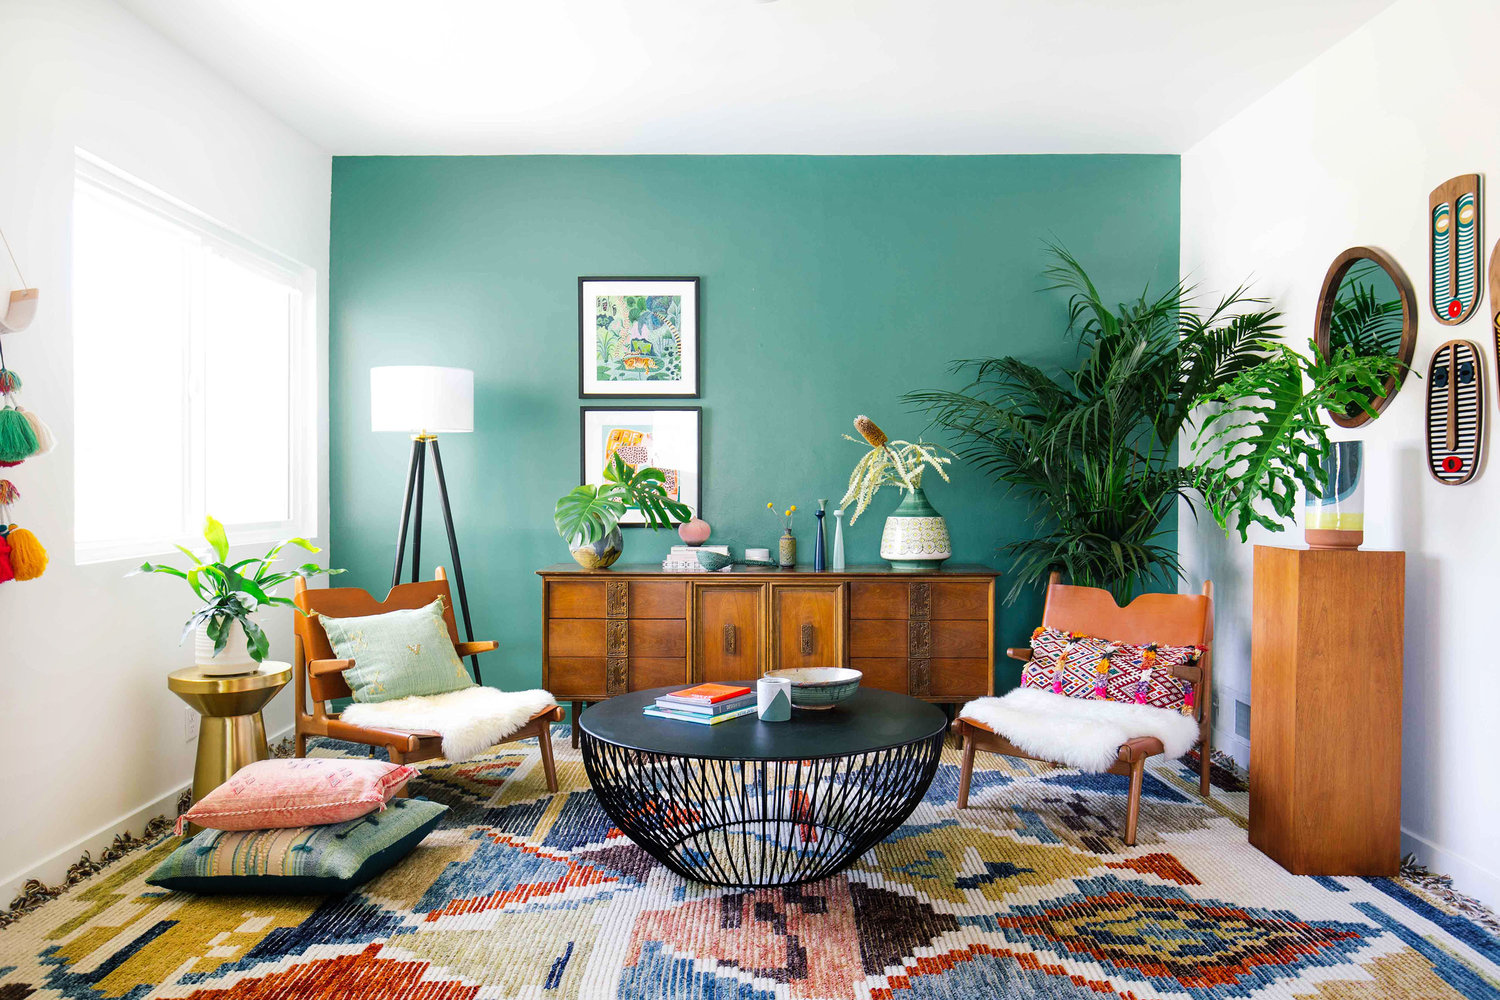 20 Easy, Unexpected Living Room Decorating Ideas   Real Simple